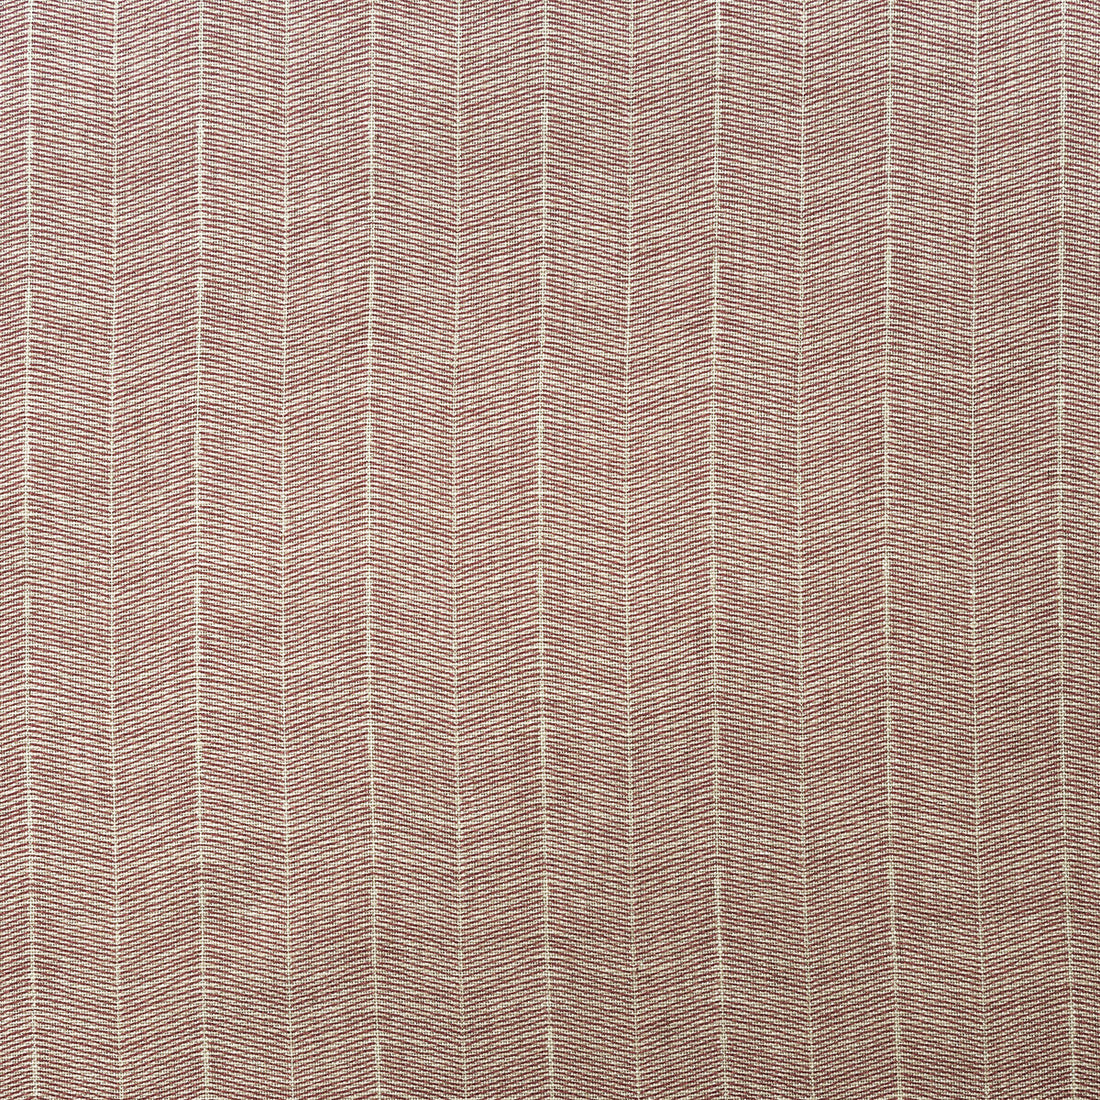 Furrow fabric in pink color - pattern AM100380.77.0 - by Kravet Couture in the Andrew Martin Garden Path collection